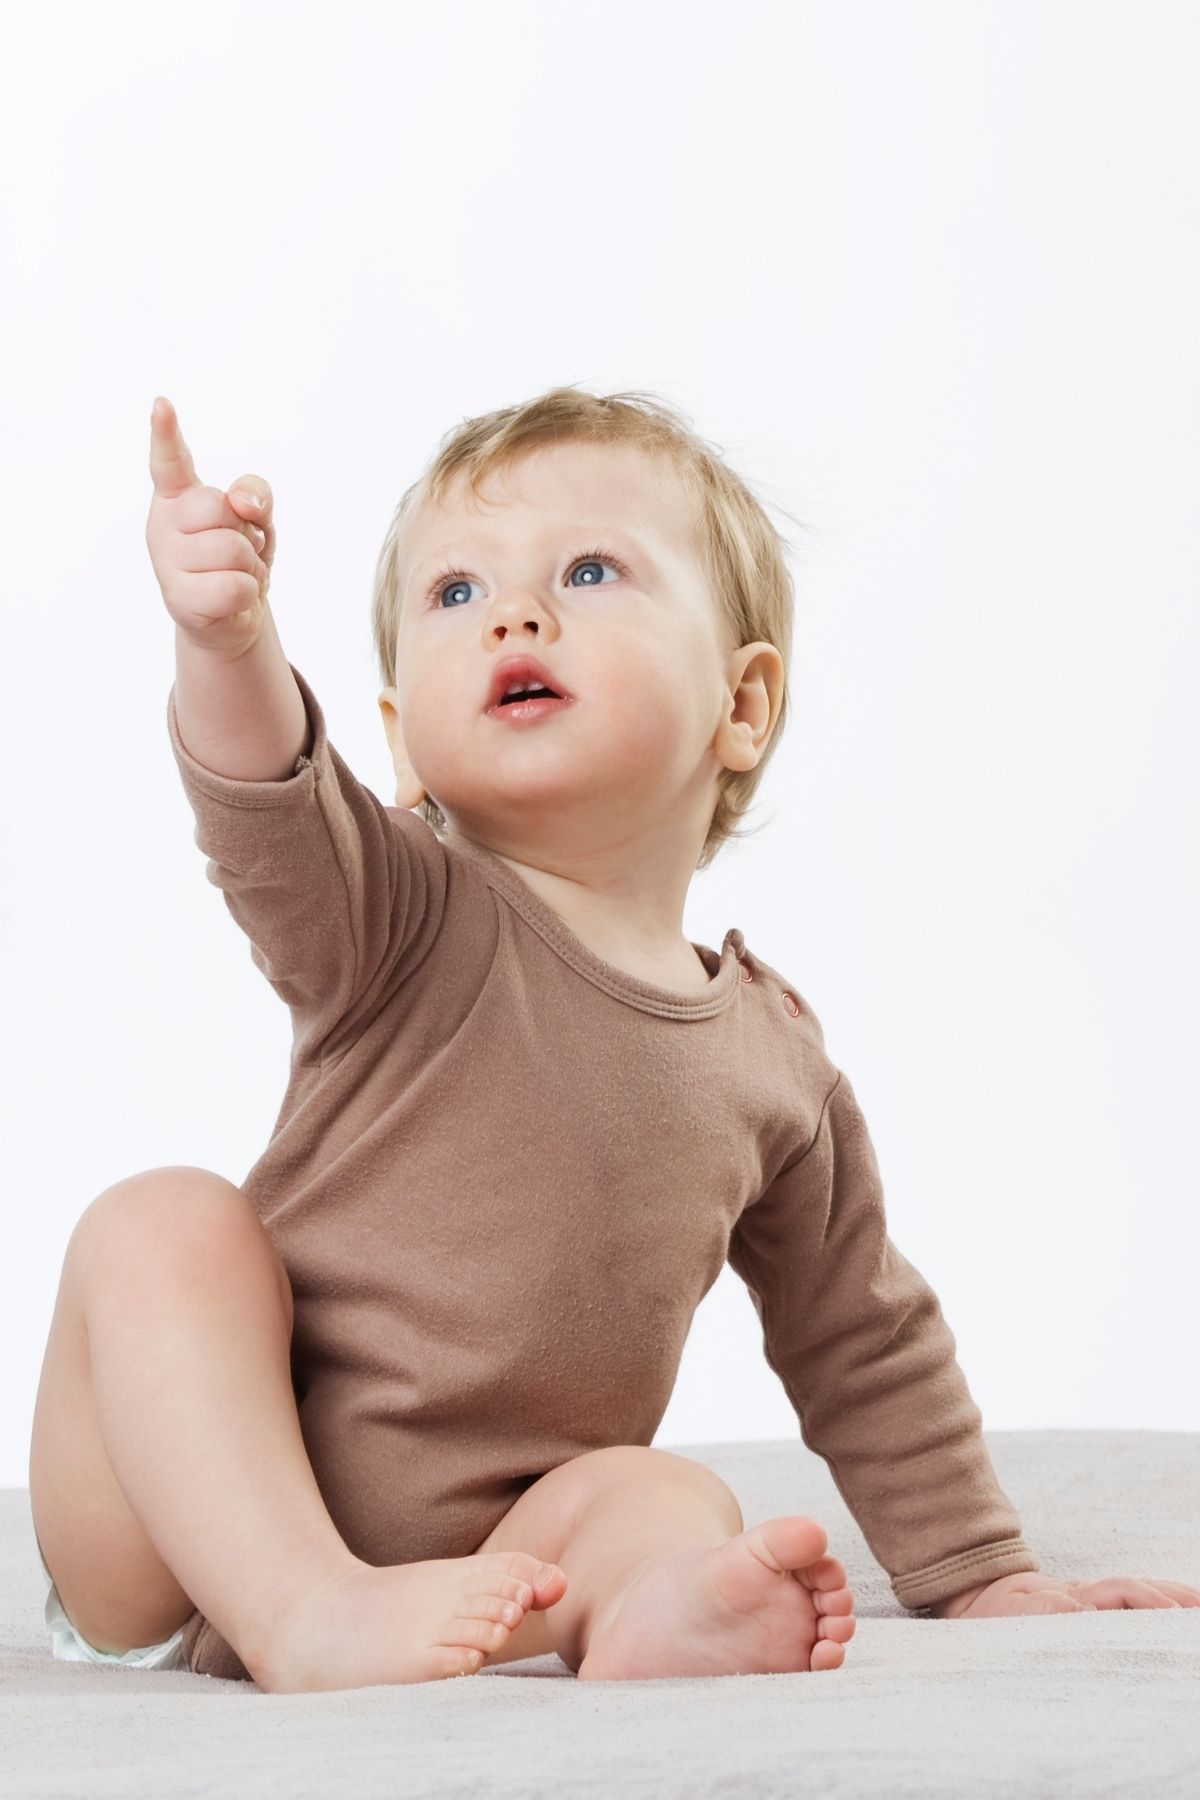 Baby boy wearing brown onesie sits in front of white background and points upward.